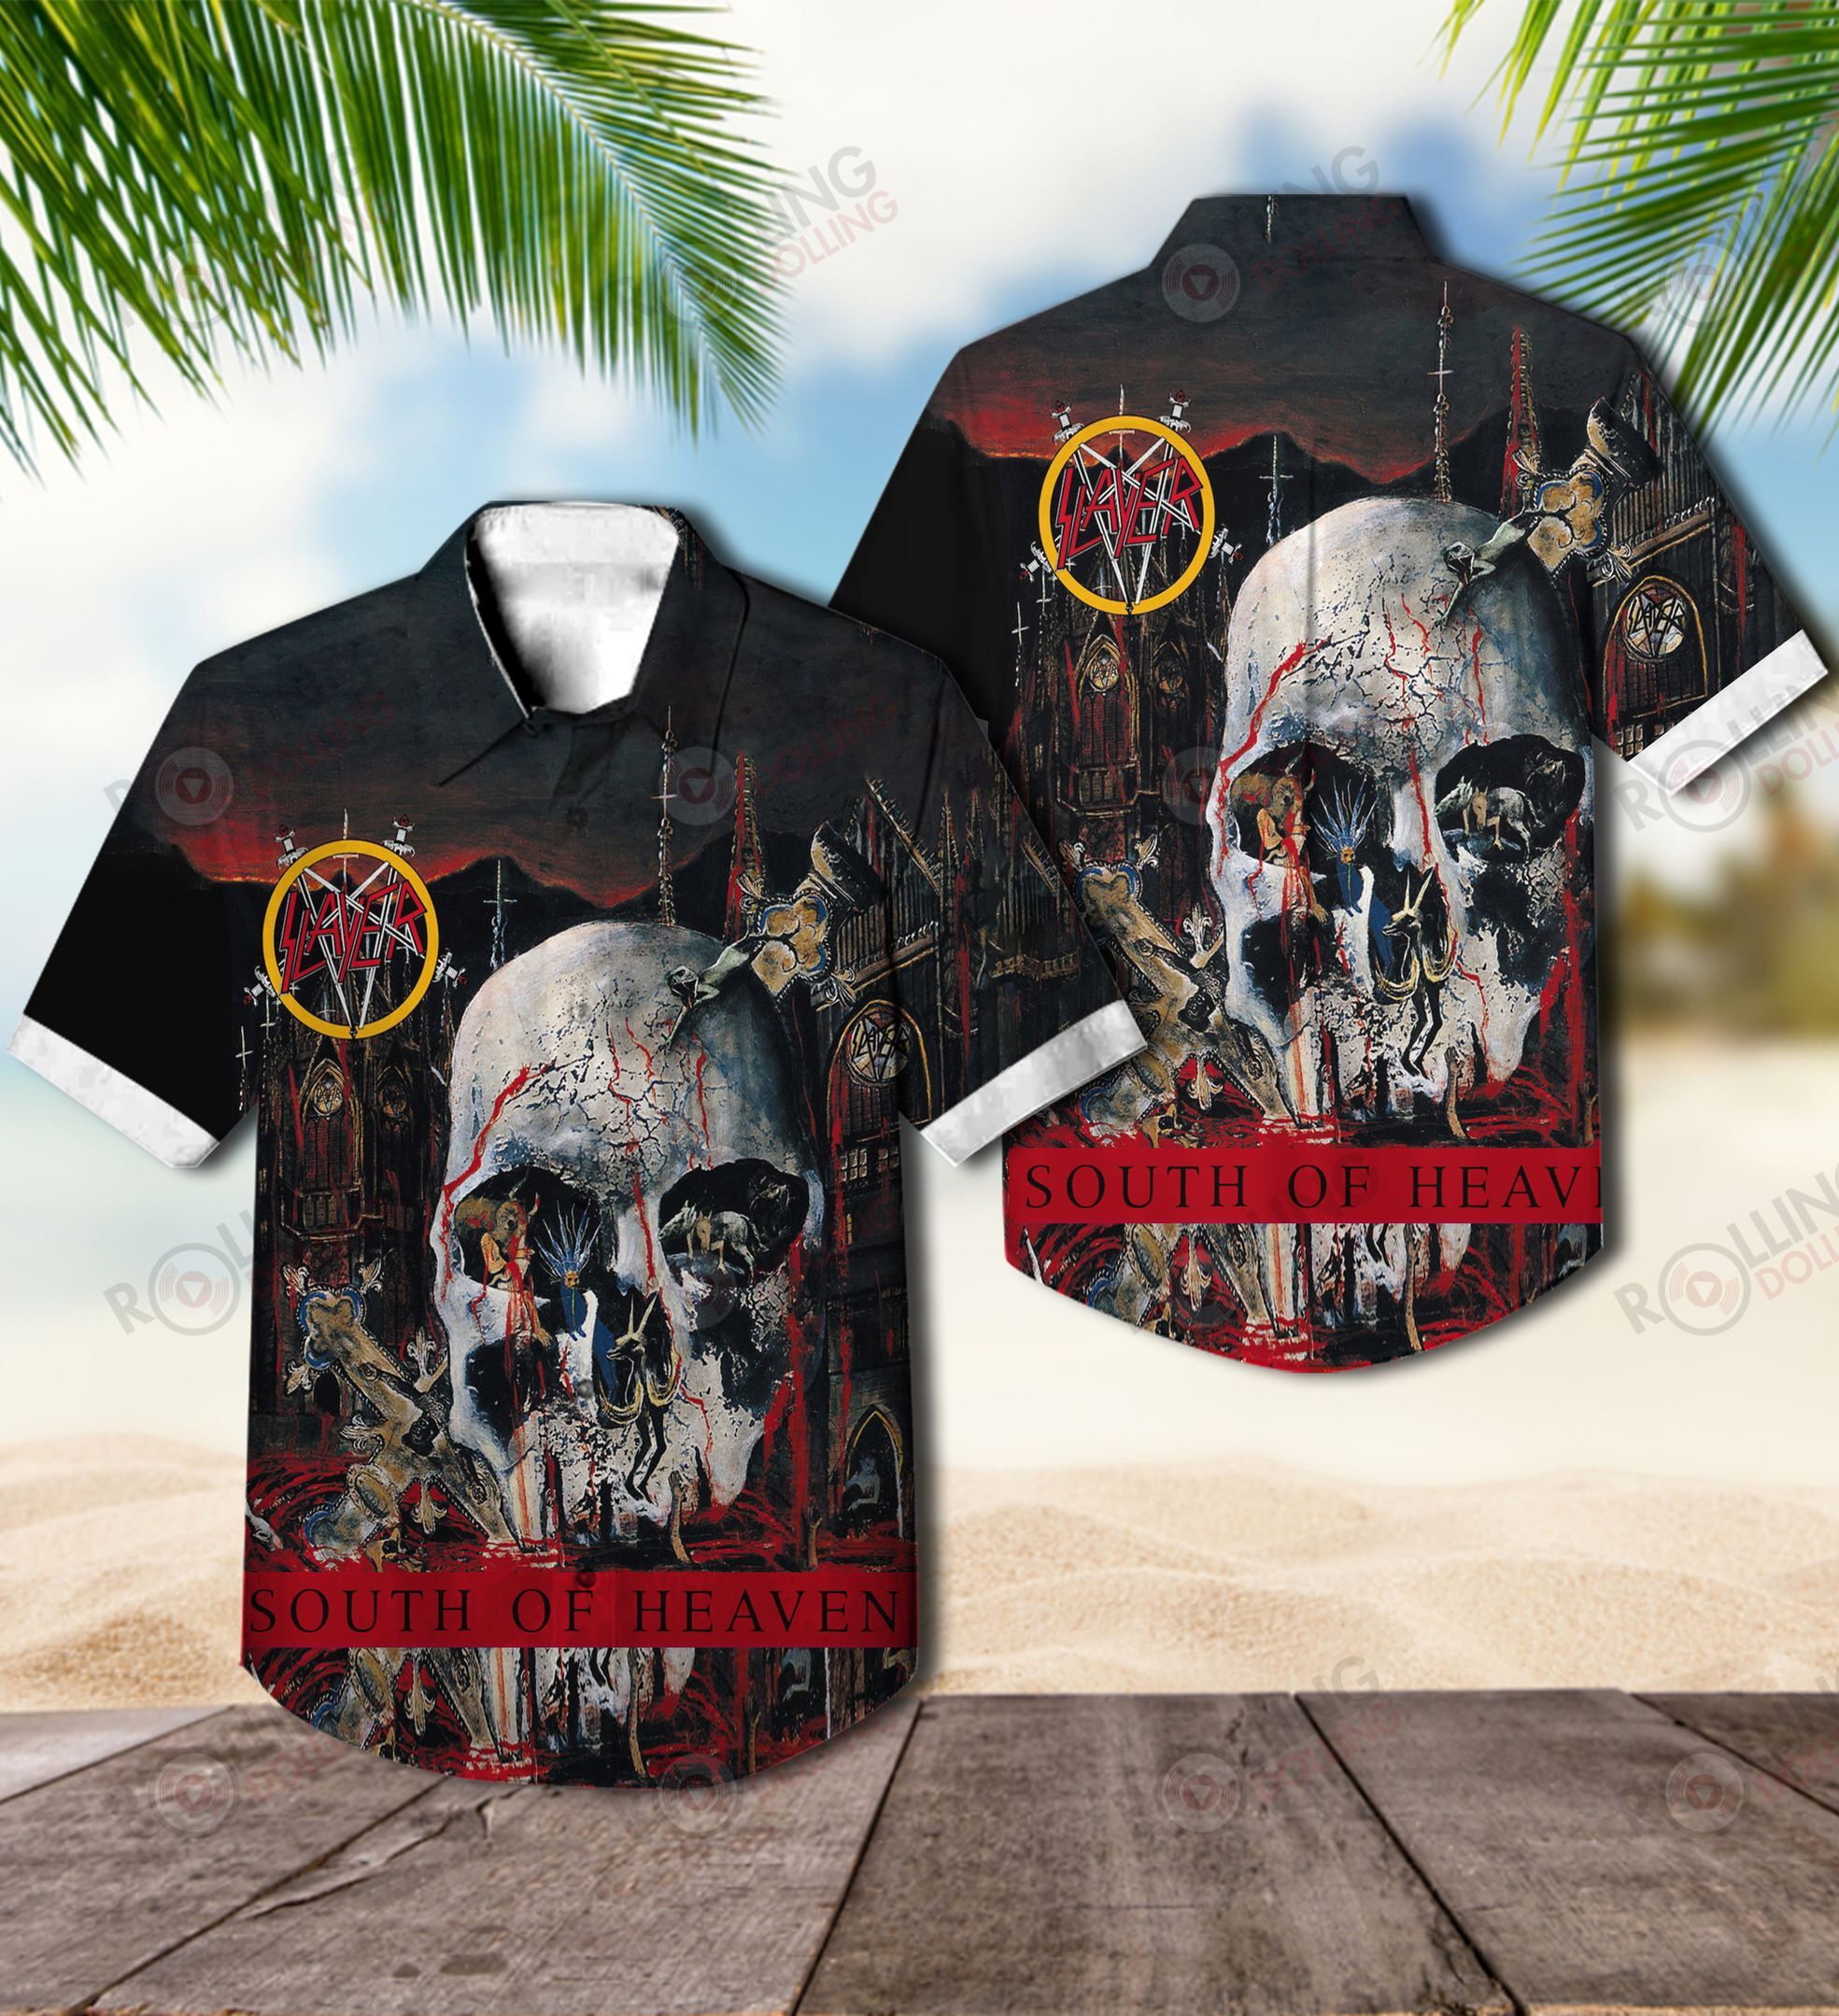 This would make a great gift for any fan who loves Hawaiian Shirt as well as Rock band 15